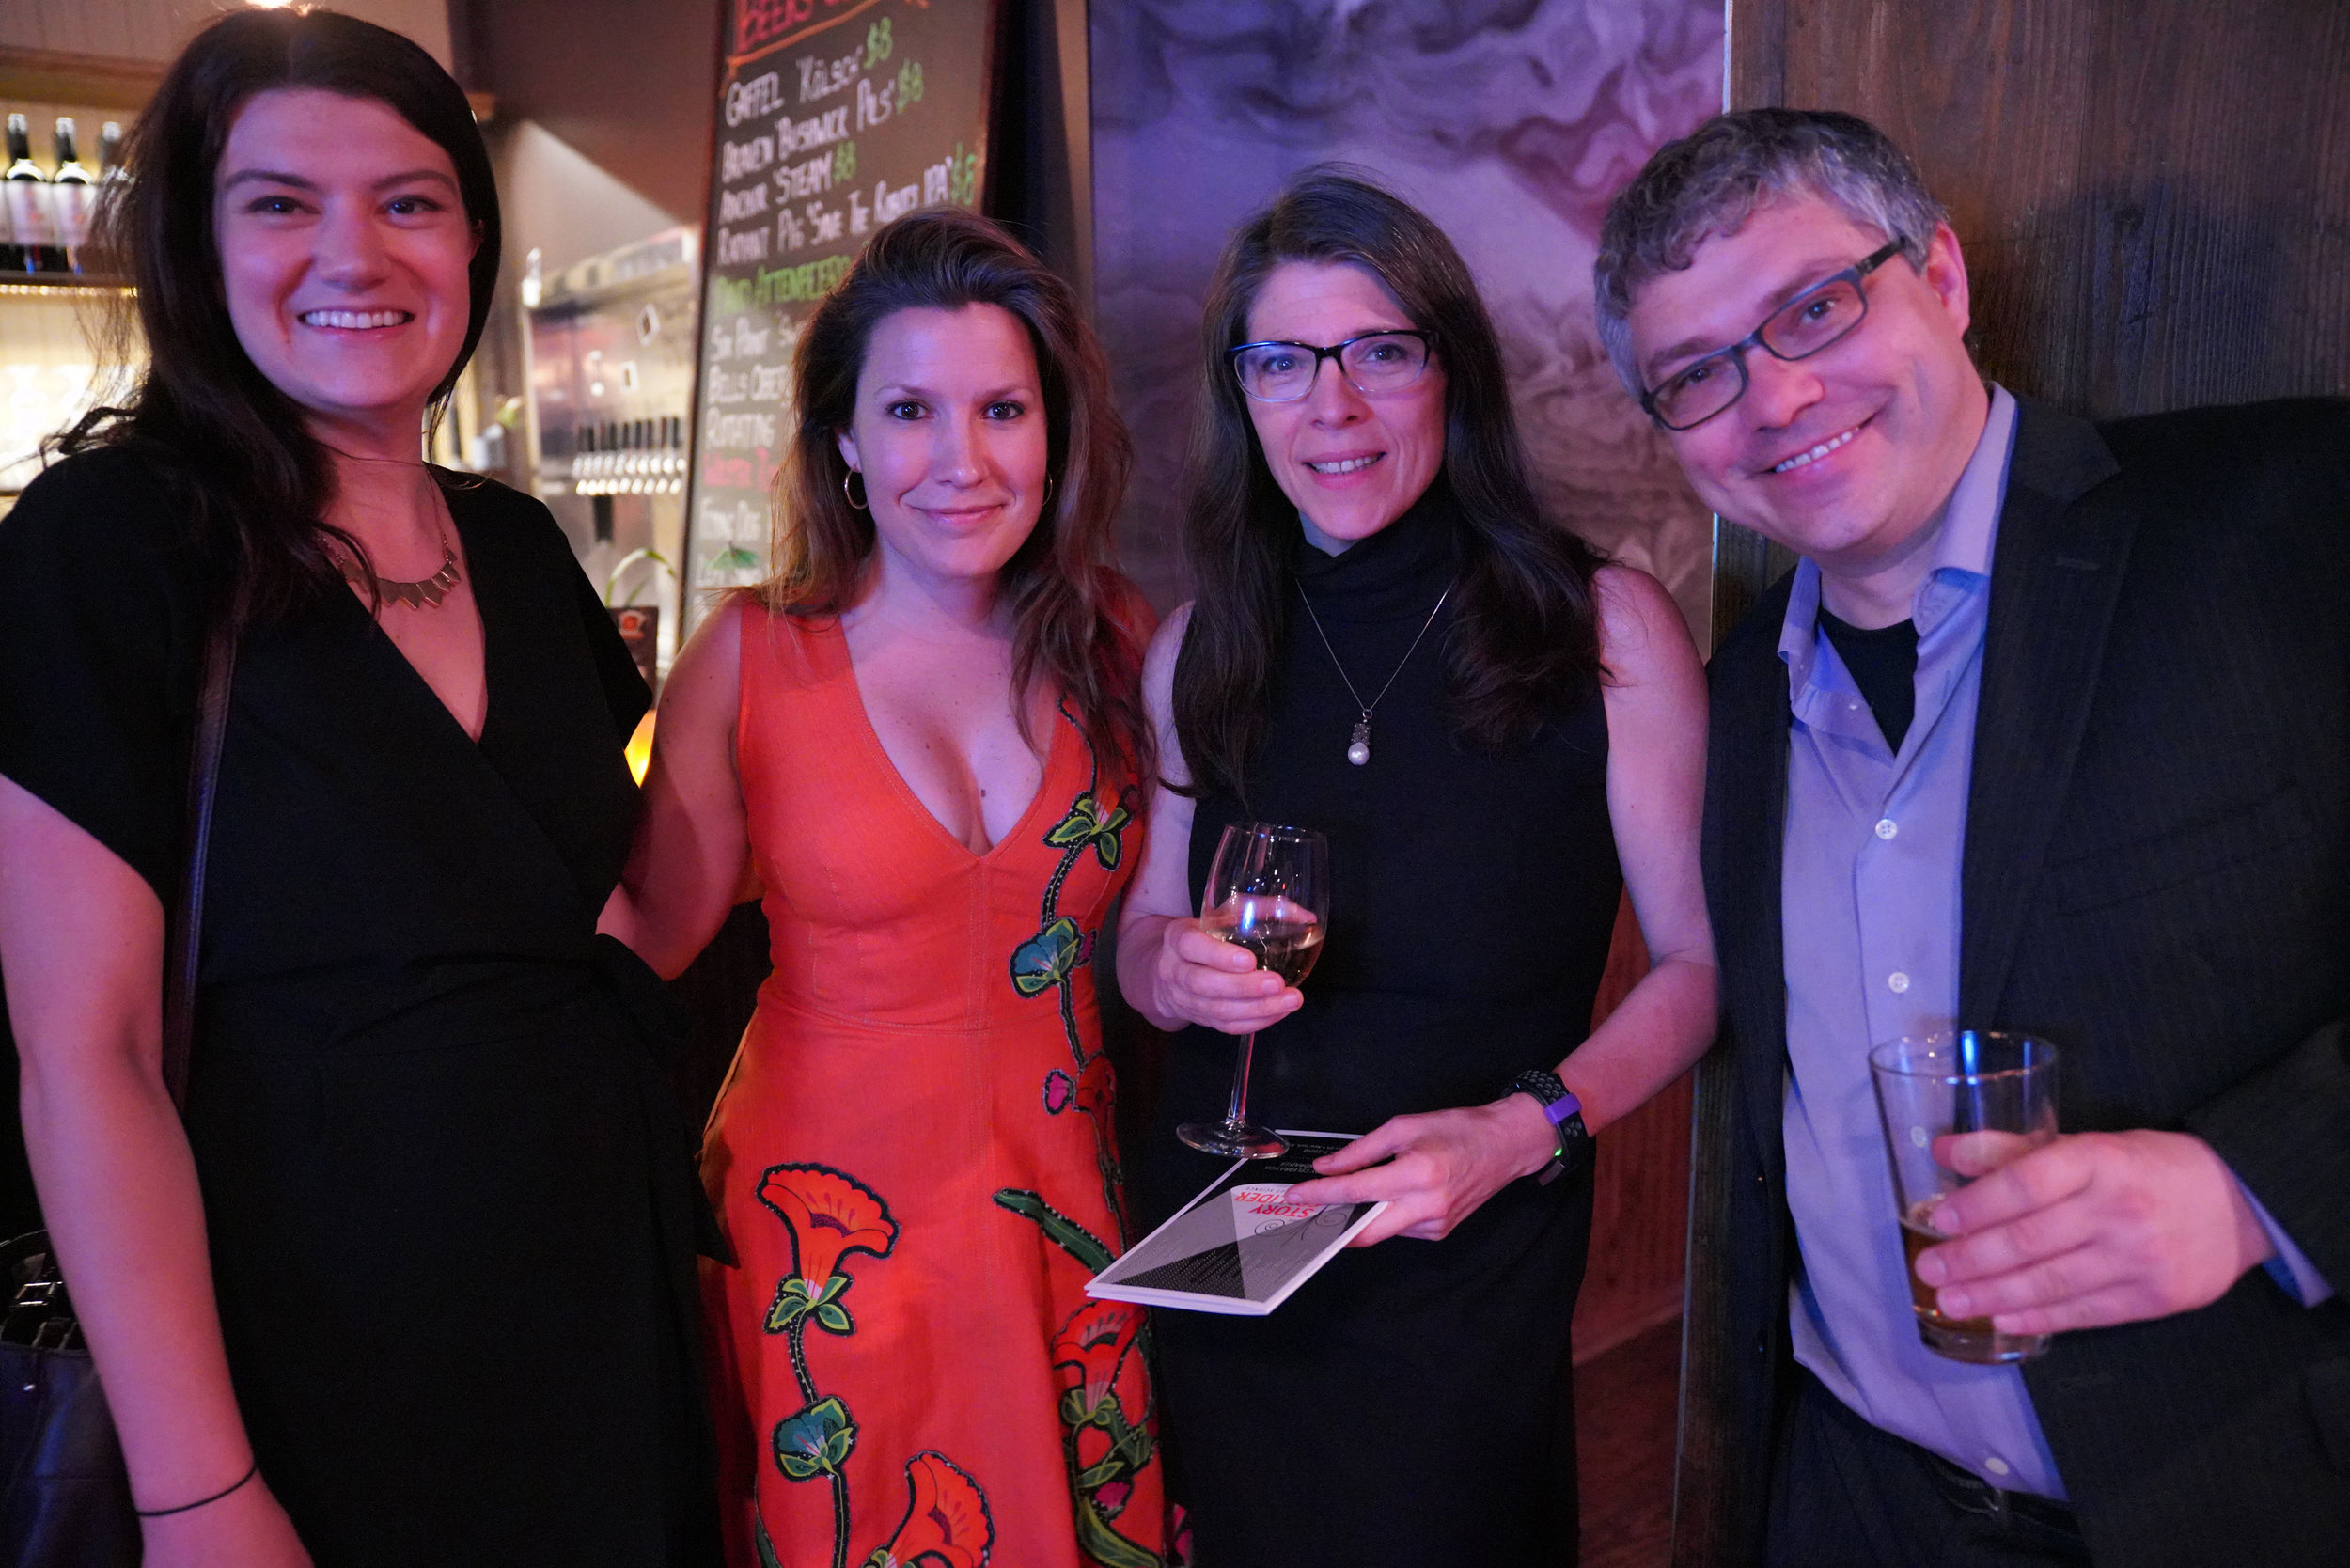  From left to right: Shannon Palus, journalist for Wirecutter/New York Times; Sarah Austin Jenness, executive producer of The Moth; Jenifer Hixson, senior director of The Moth; and Ben Lillie, chairman of The Story Collider’s board.  